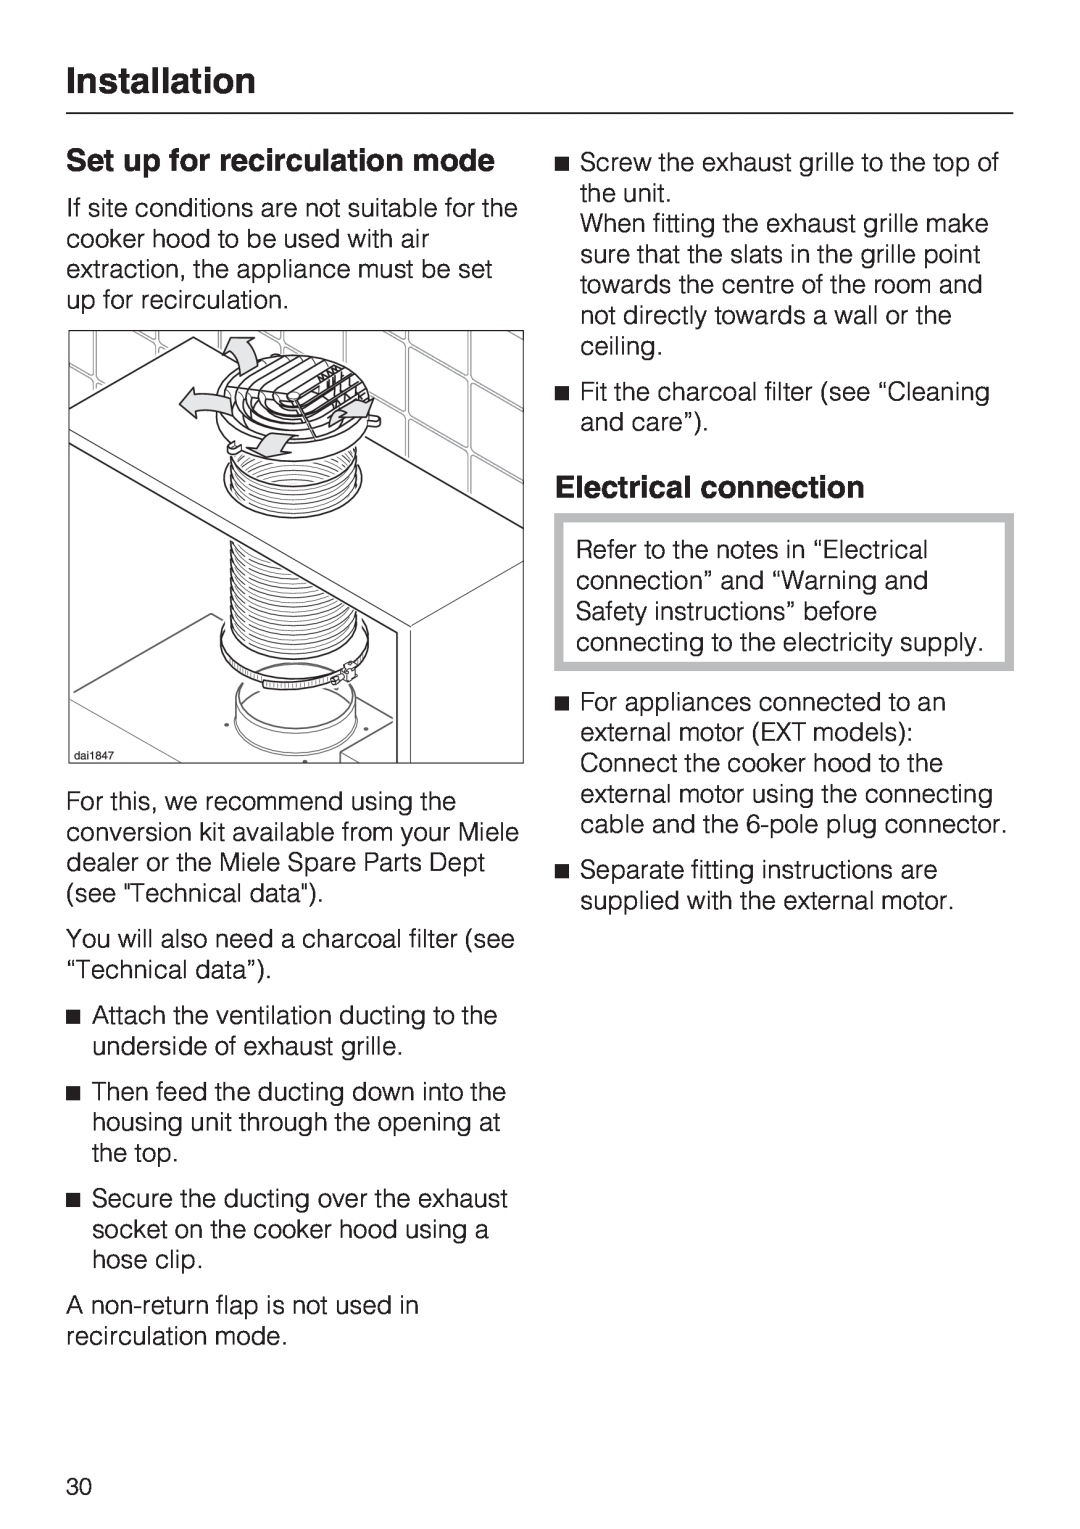 Miele DA 3190 EXT, DA 3160 EXT installation instructions Set up for recirculation mode, Electrical connection, Installation 